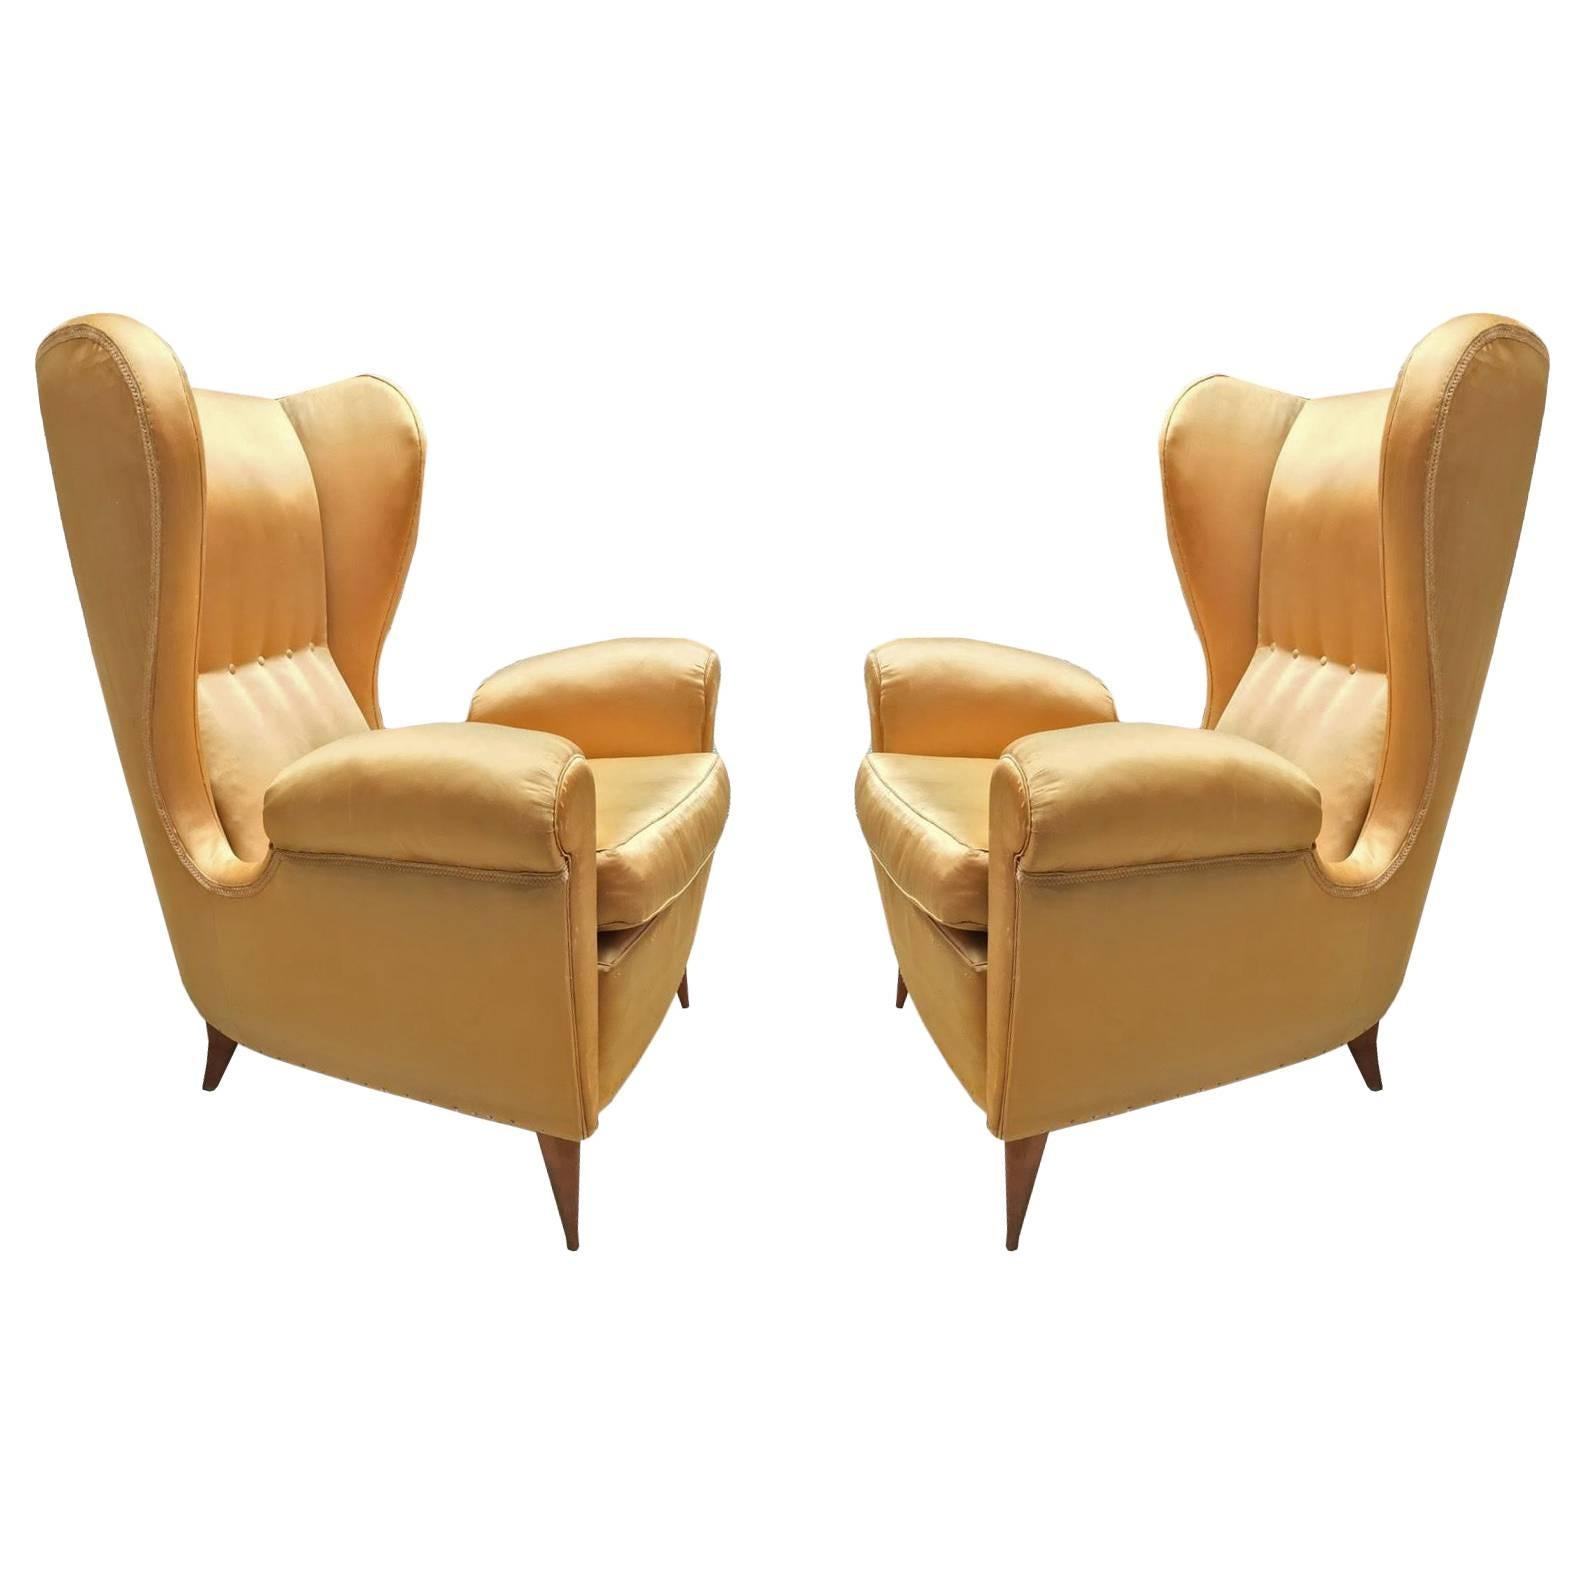 Beautiful Pair of Armchairs, Design by Paolo Buffa, 1948